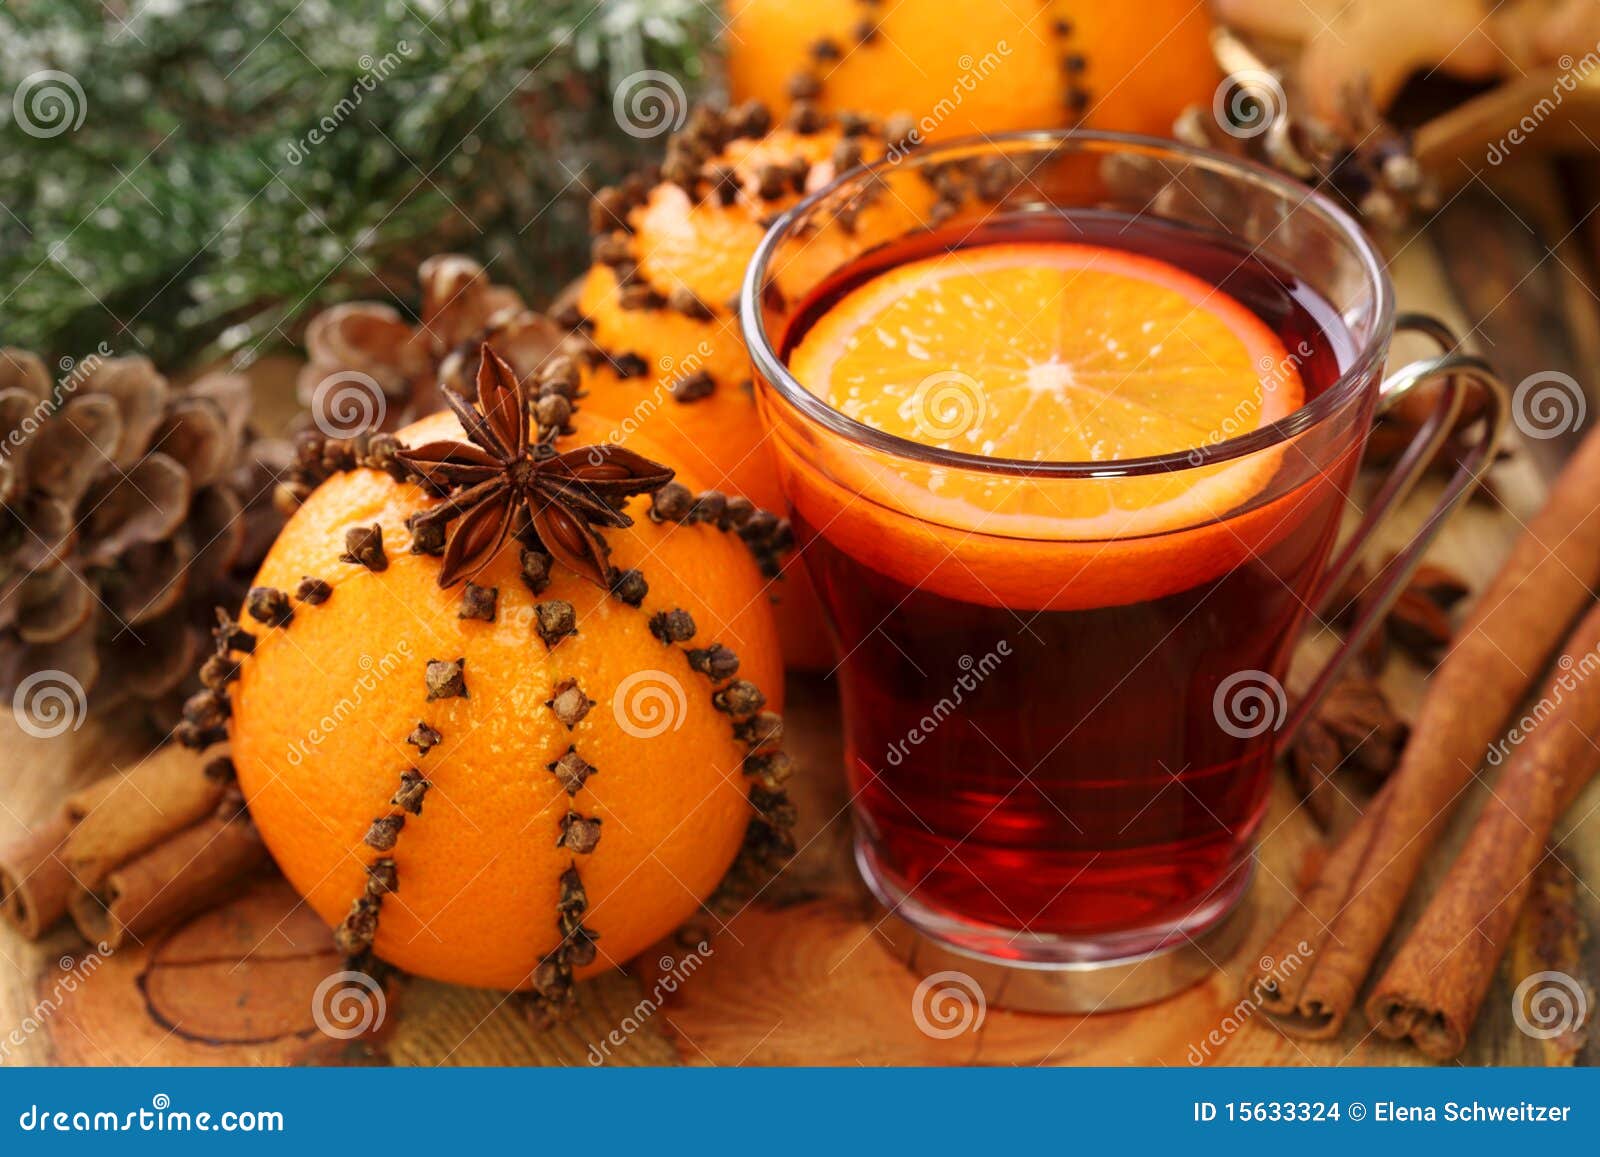 Winter drink with oranges stock photo. Image of still - 15633324